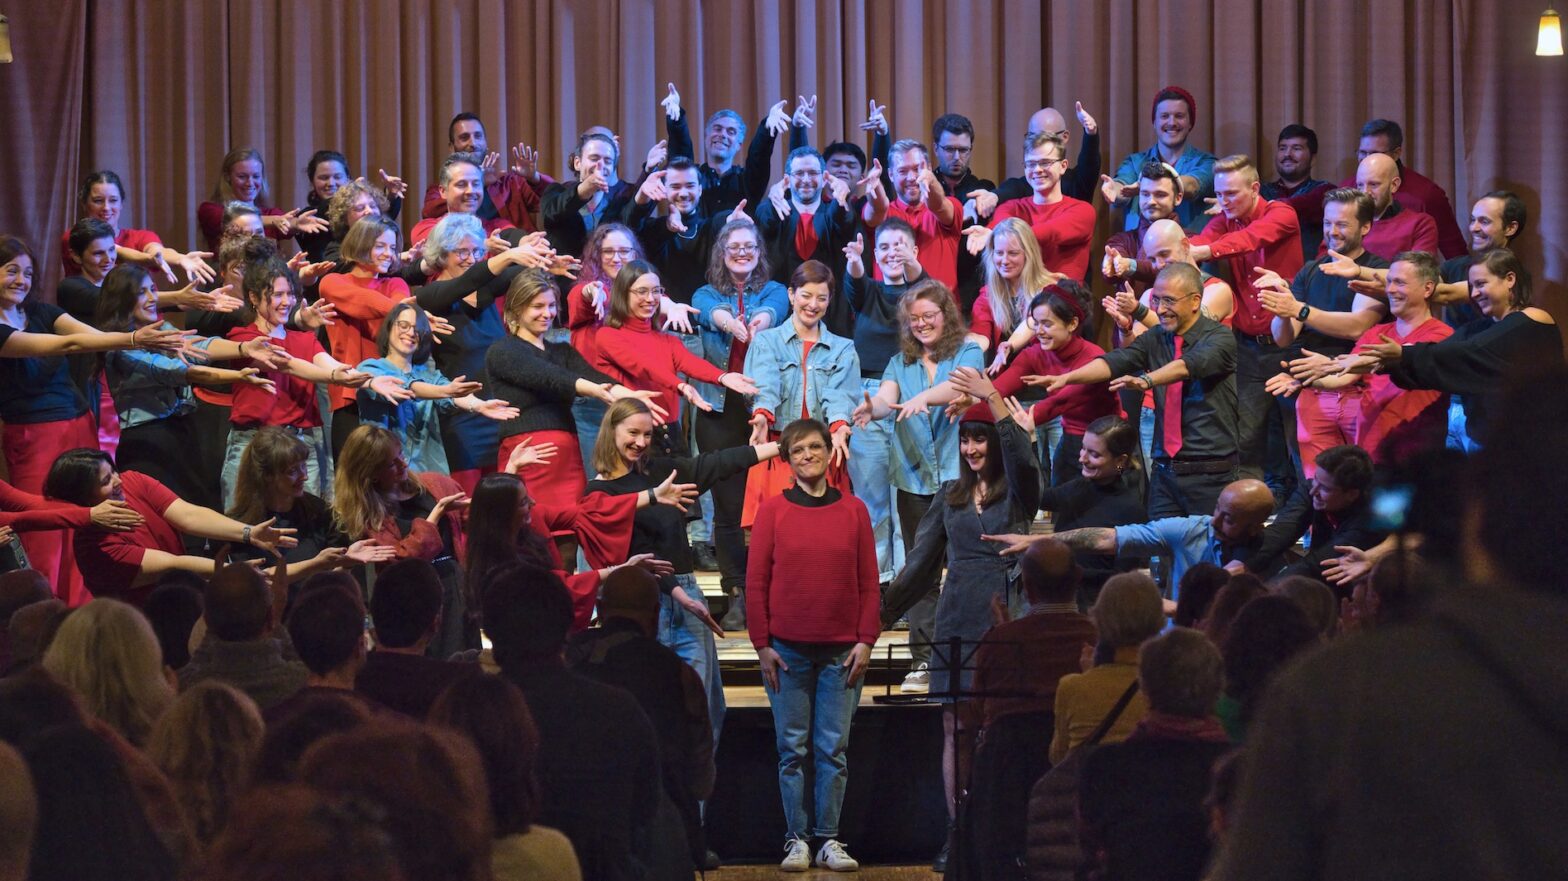 Brussels three LGBTQI+ choirs come together at the Sing for Life concert